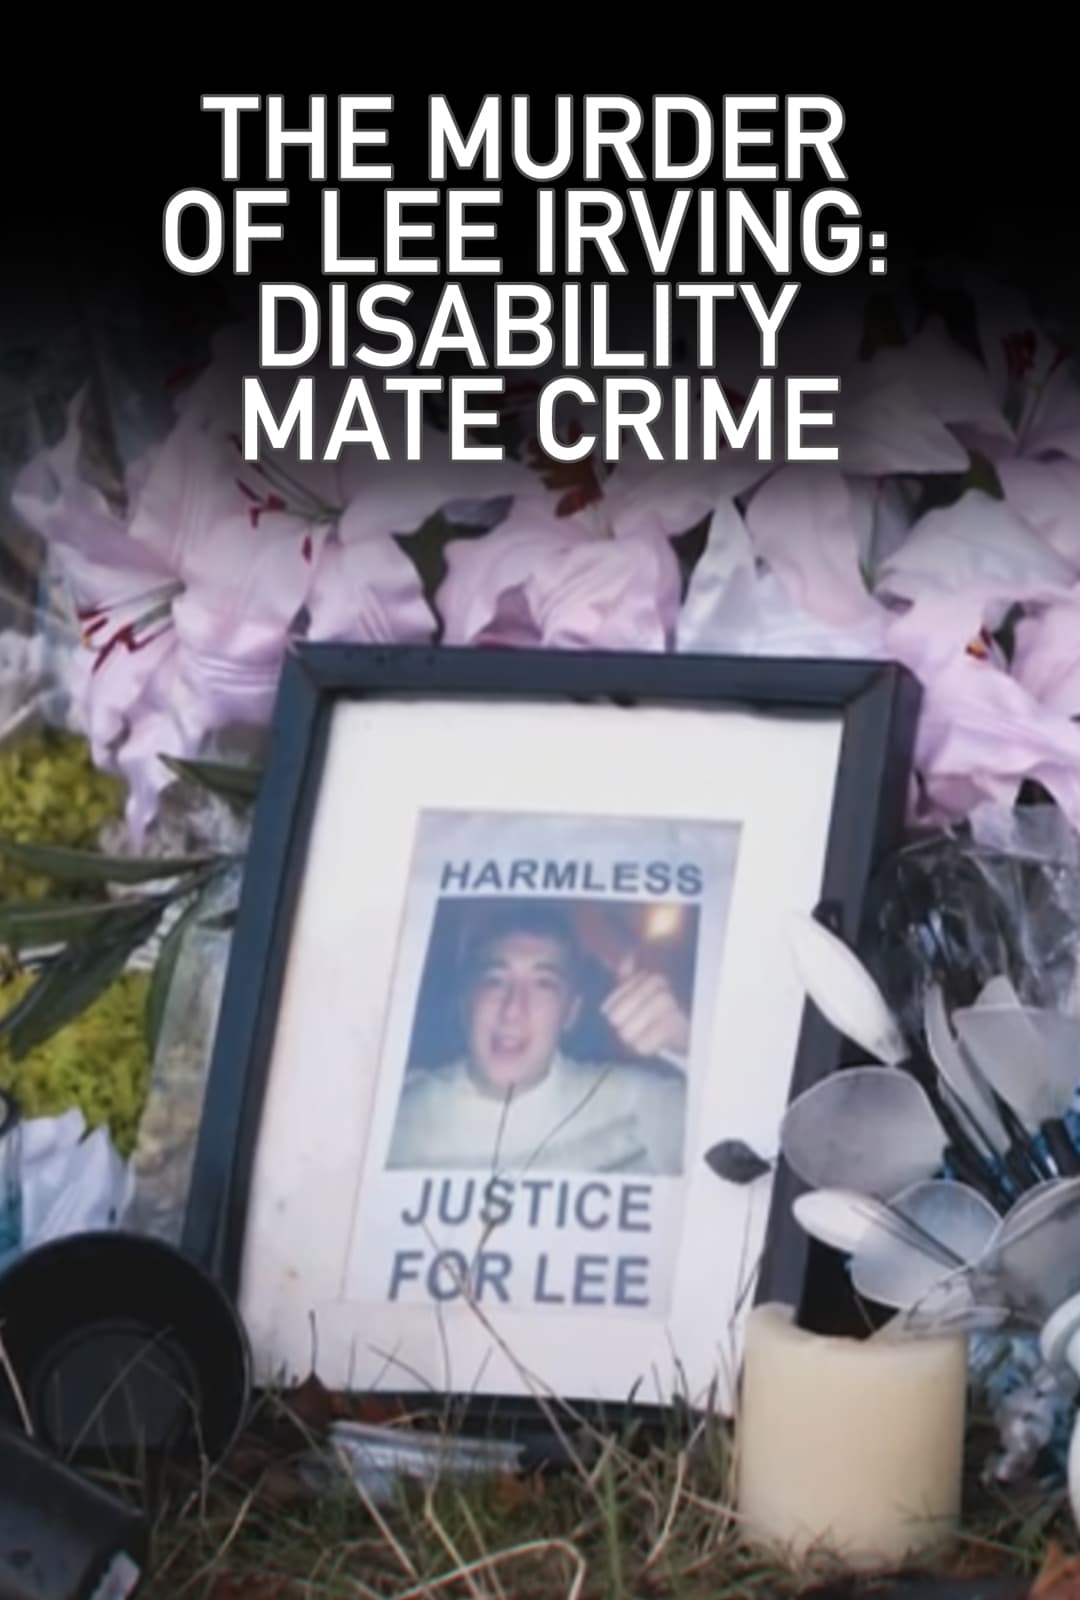 The Murder of Lee Irving: Disability Mate Crime